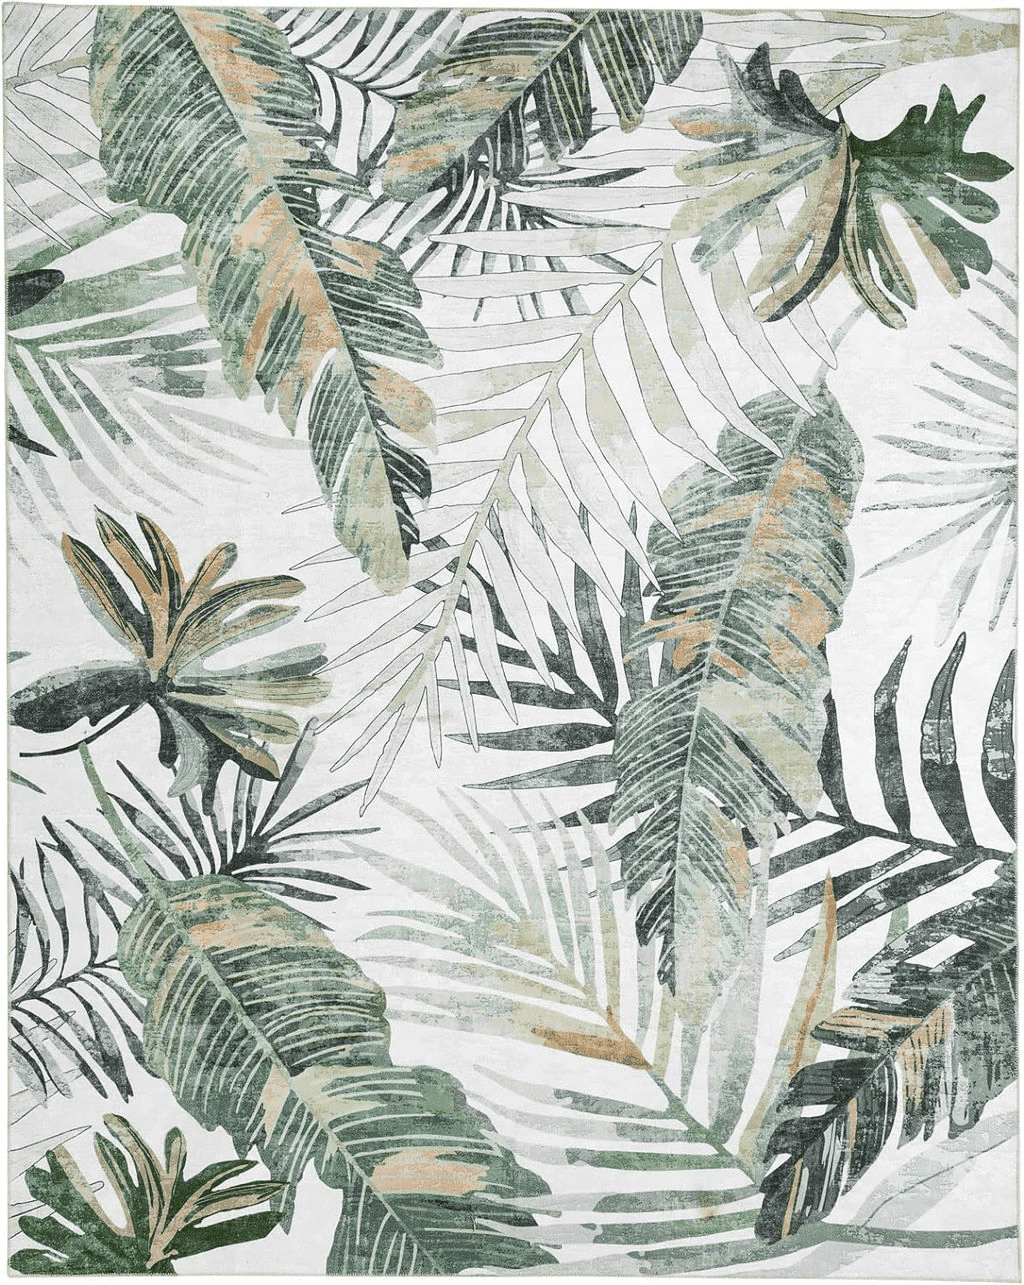 Area Black White DECOMALL Jasmine Washable Area Rugs 8x10ft, Tropical Plant Non Slip Rug, Soft and Thin Large Carpet for Living Room Bedroom,8x10ft Green/Multi